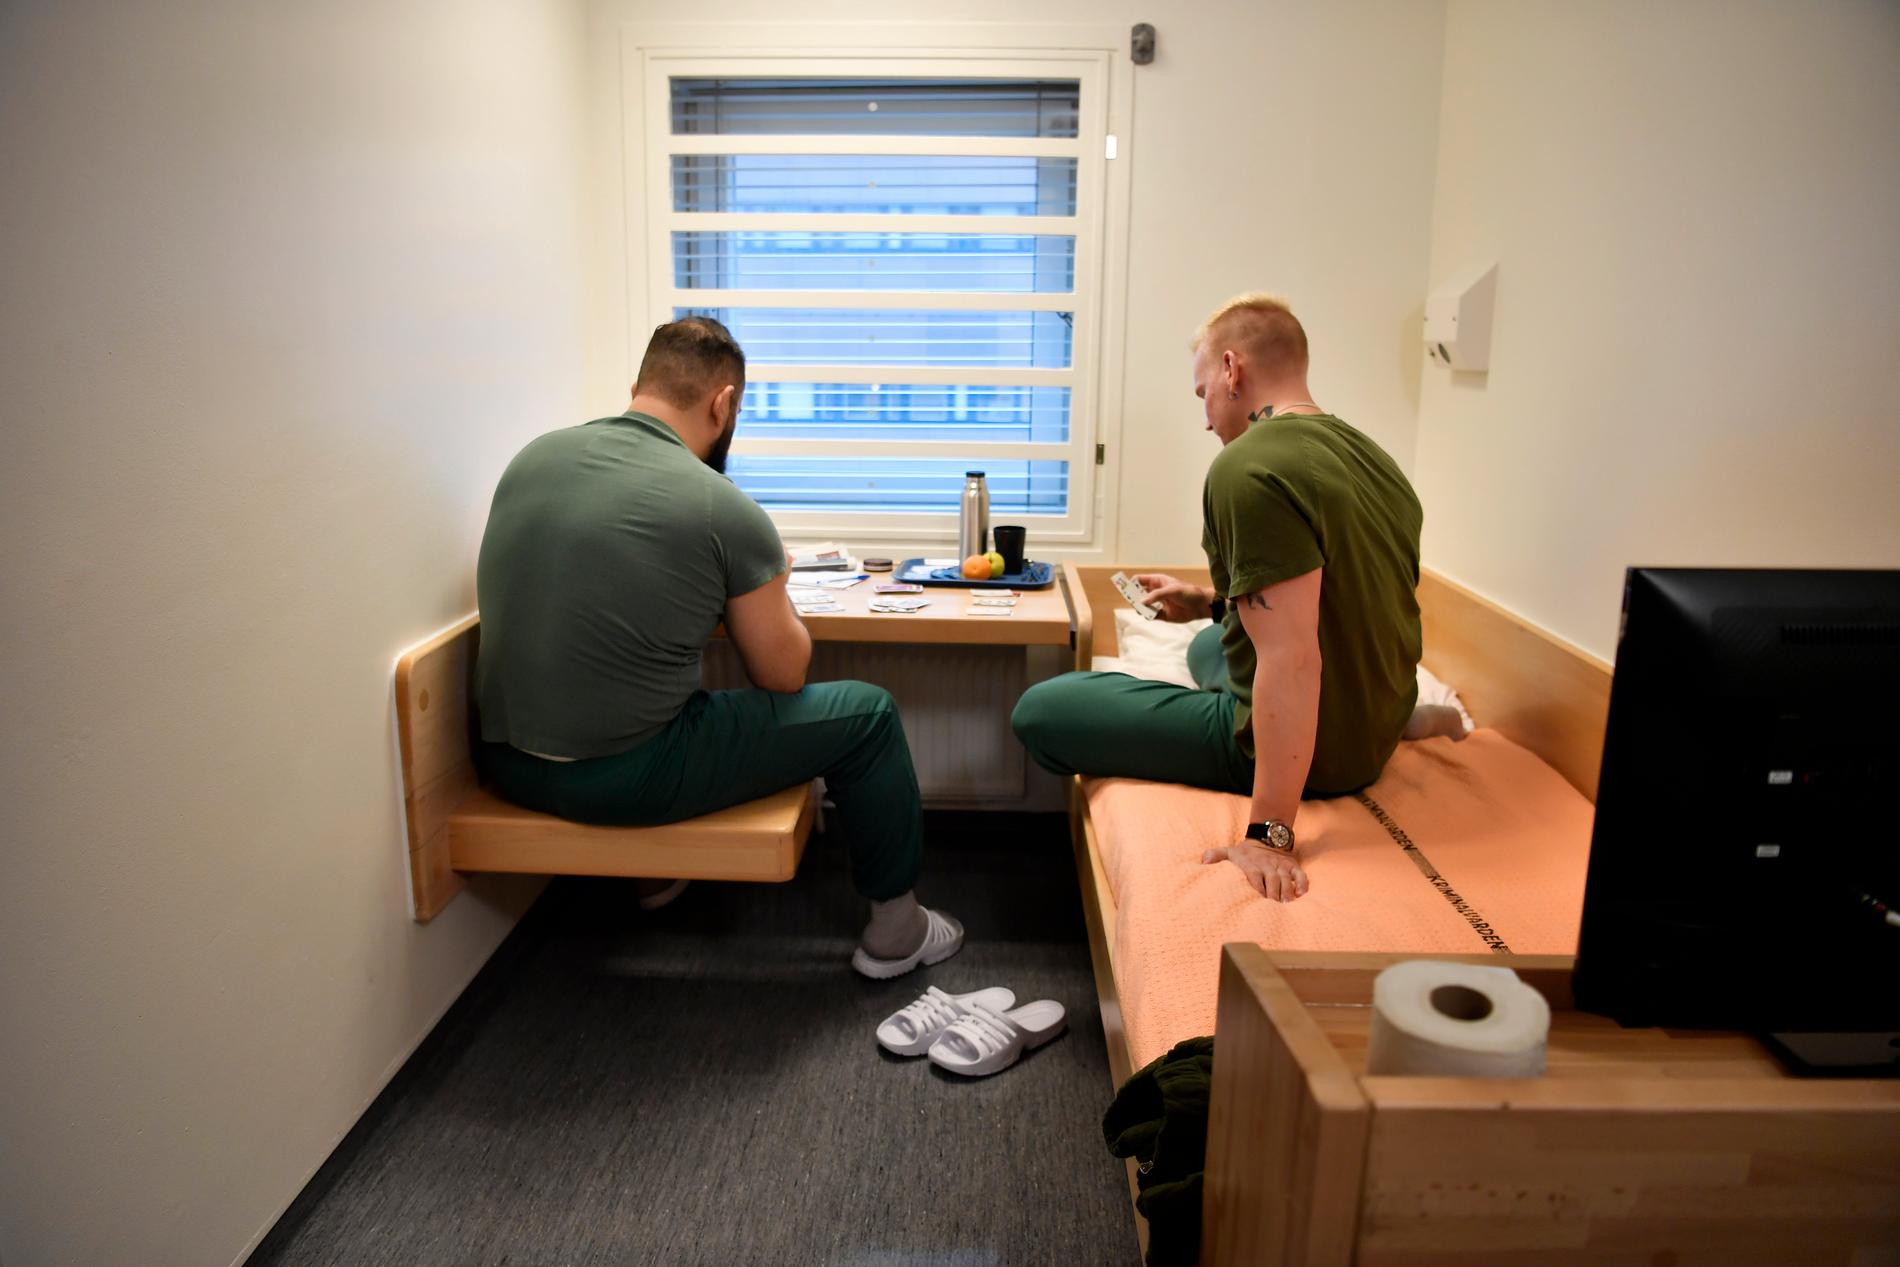 Jail staff pose as inmates in a cell at the Kronoberg jail. Inmates are not allowed to be photographed but when Aftonbladet visited the jail in December 2017 – a month before it was put back into use after a refurbishment  – jail staff posed as inmates.